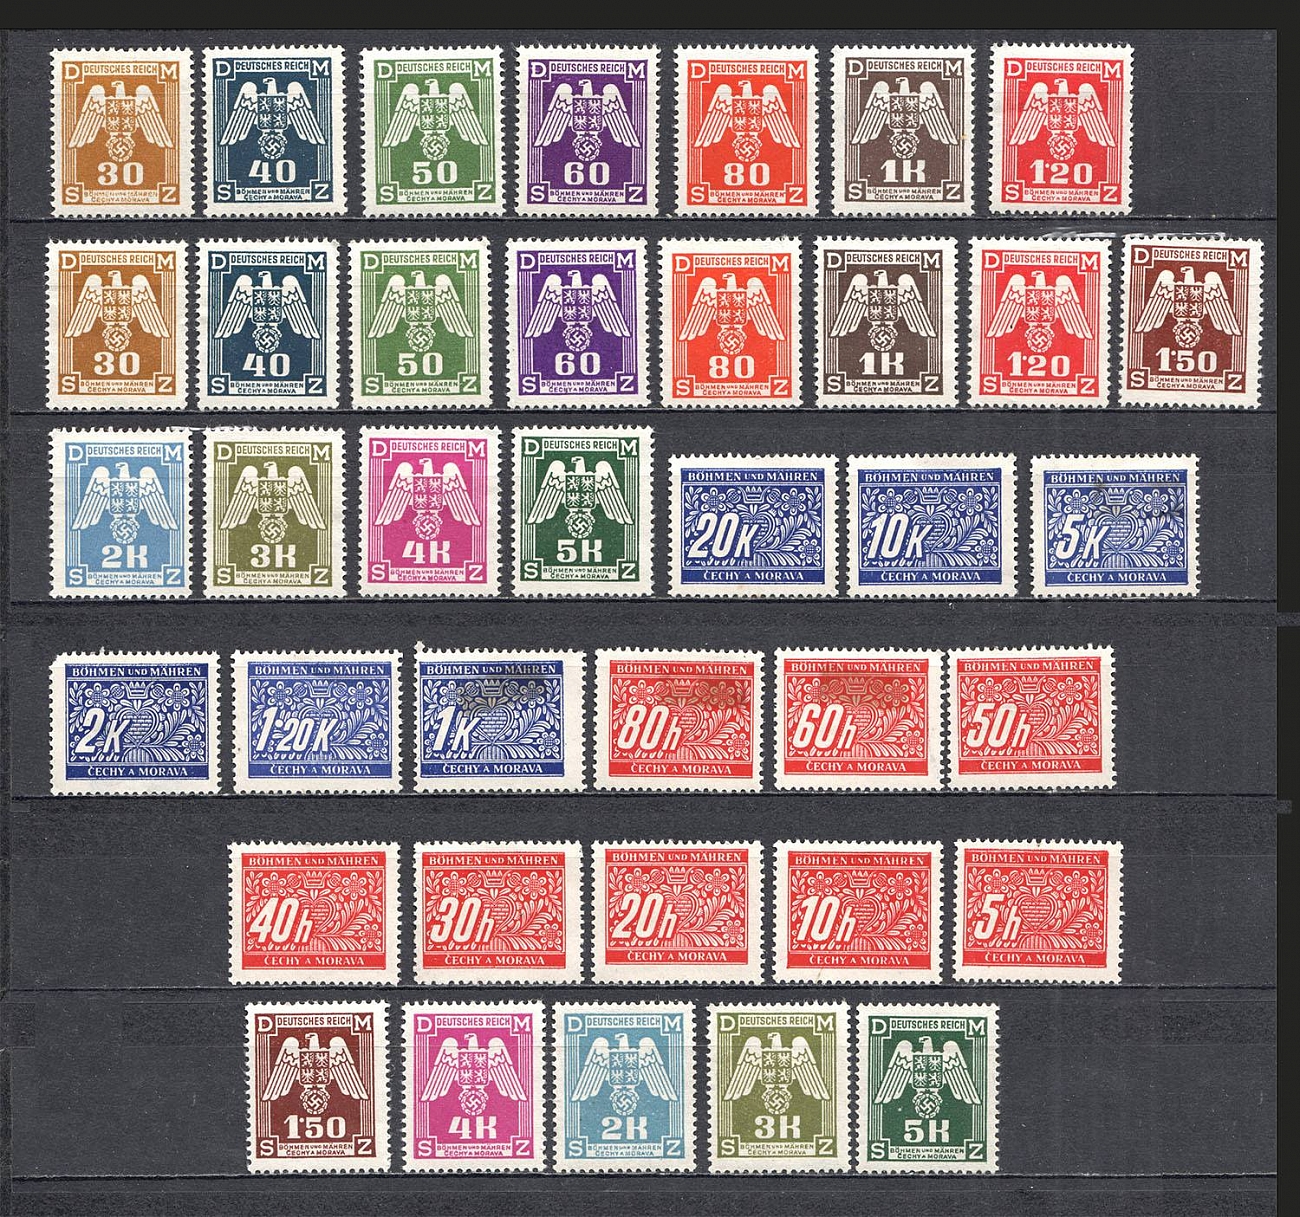 1939-43 Bohemia and Moravia Official Stamps (Full Sets, MH/MNH) | oldbid